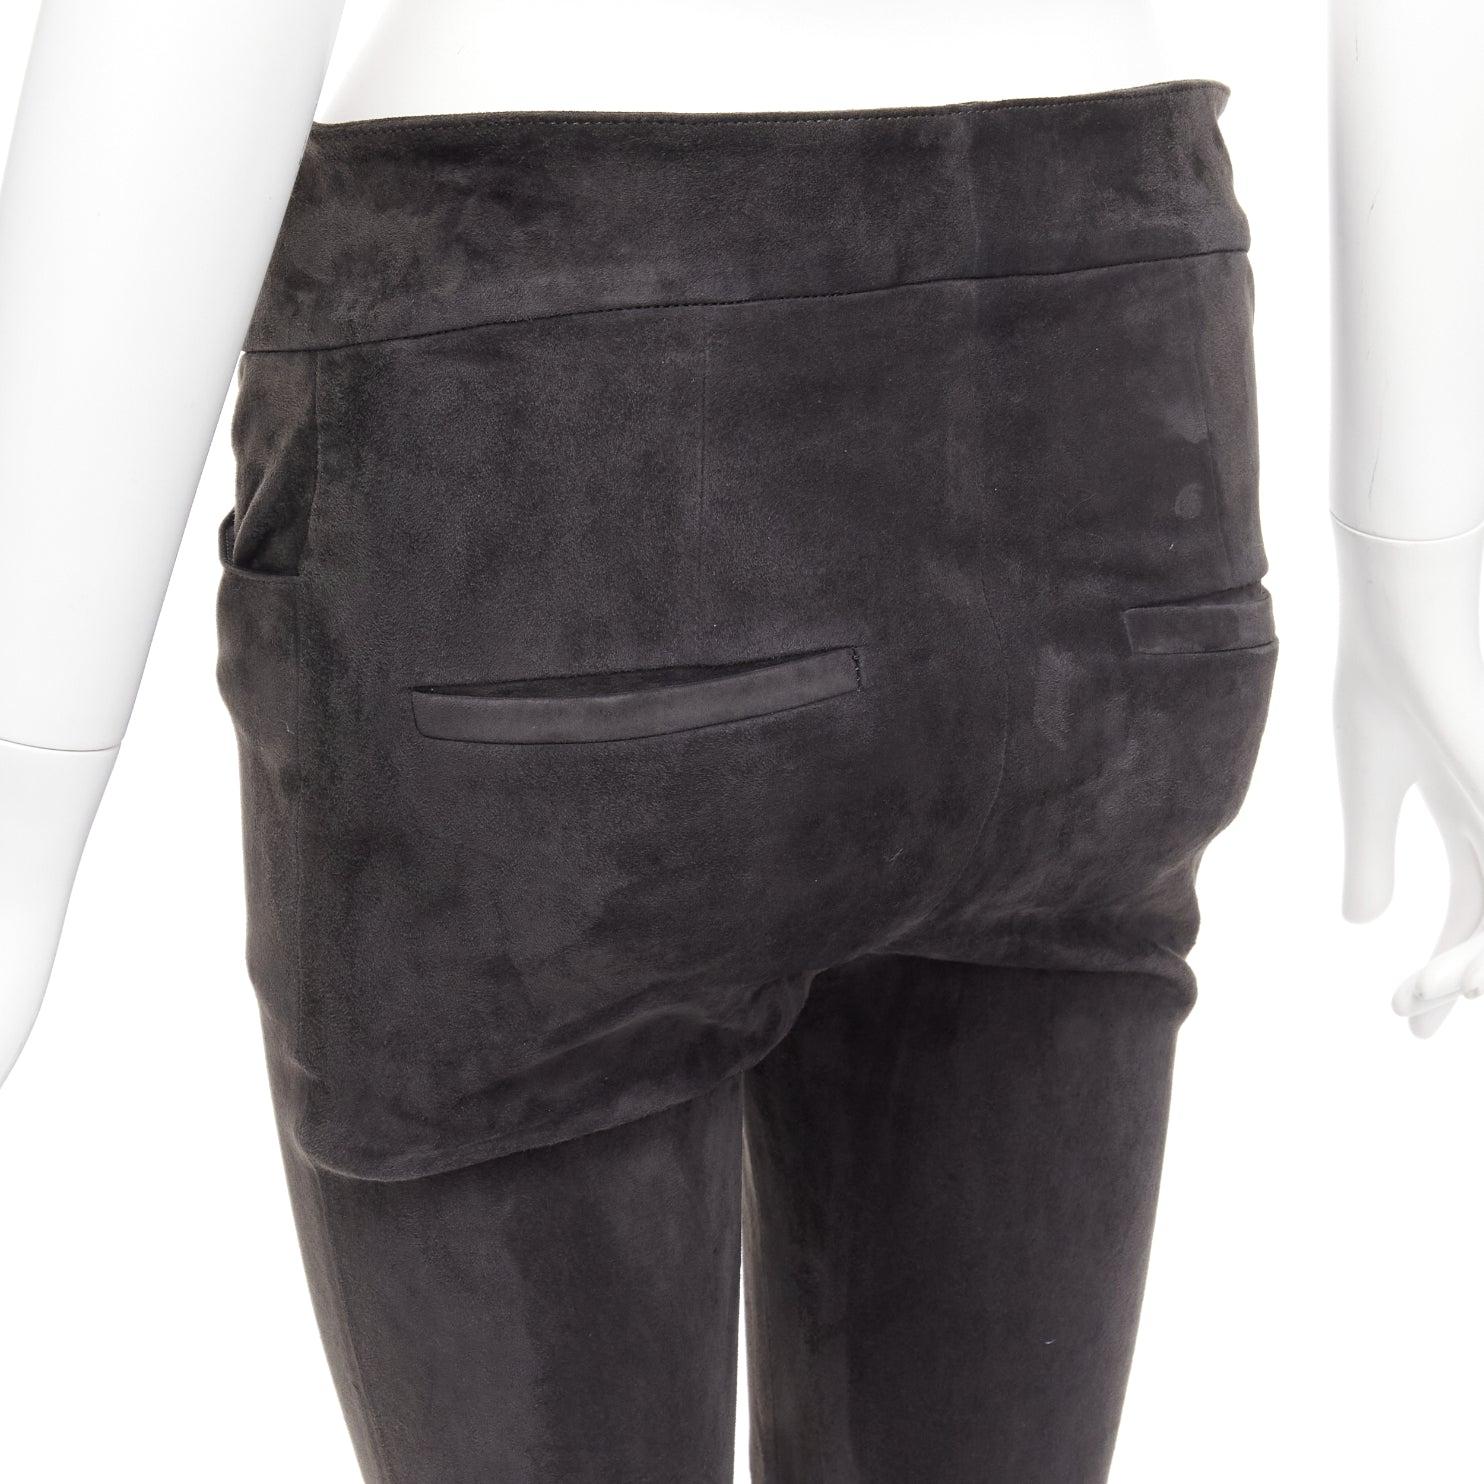 ISABEL MARANT 100% lambskin suede leather grey high waisted skinny pants FR36 S For Sale 2